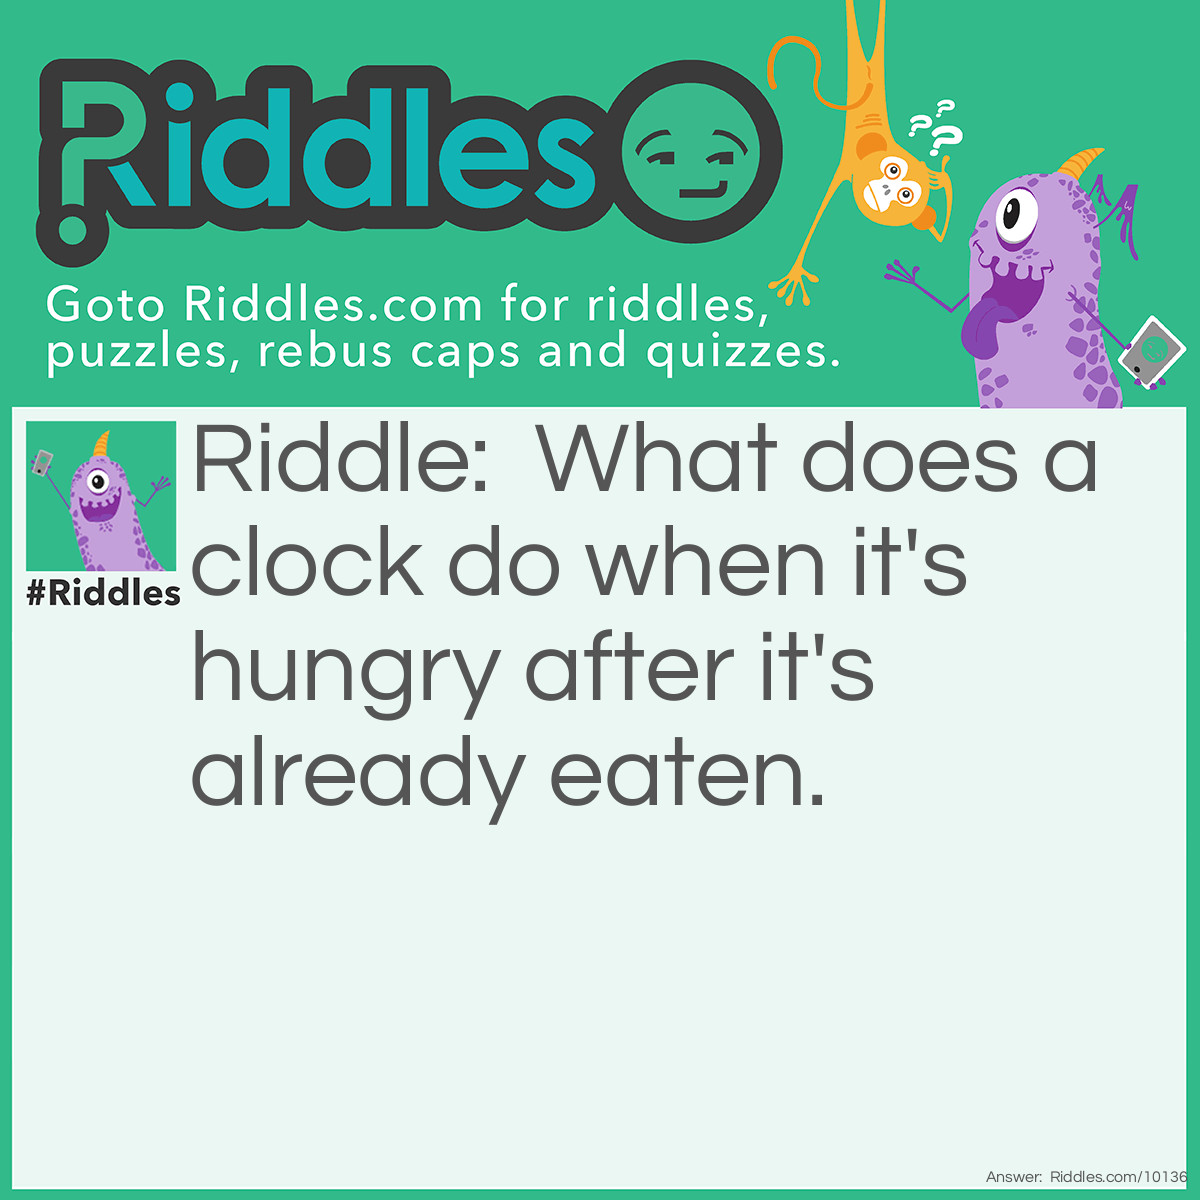 Riddle: What does a clock do when it's hungry after it's already eaten. Answer: It goes back four seconds!